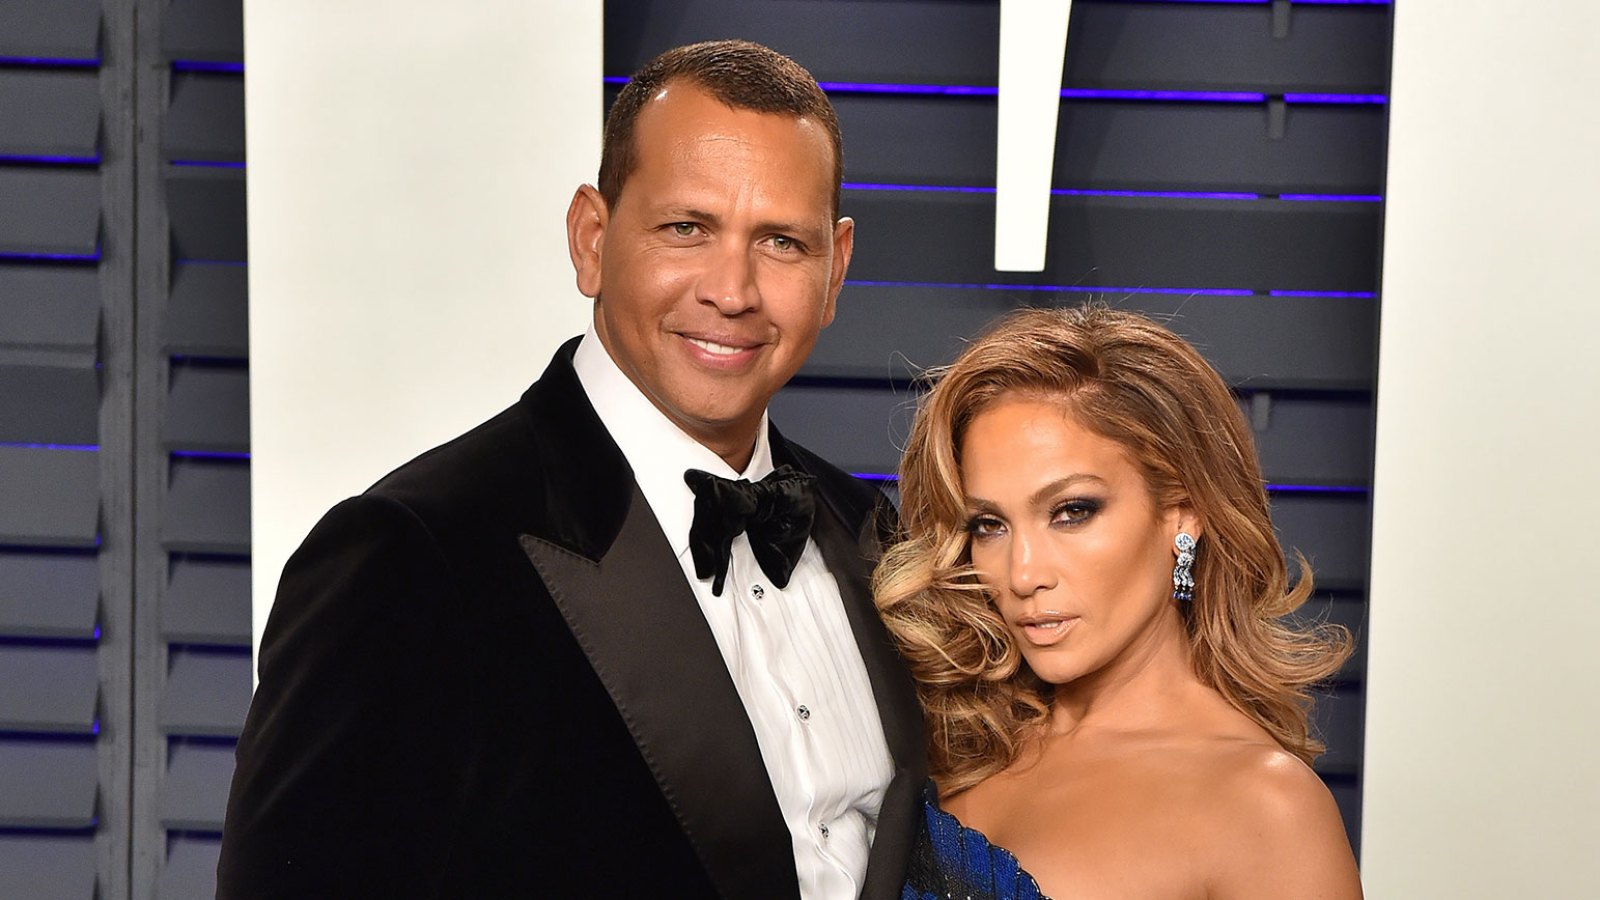 Jennifer Lopez Reveals She Knew After 'About a Year' That She Wanted to Marry Alex Rodriguez